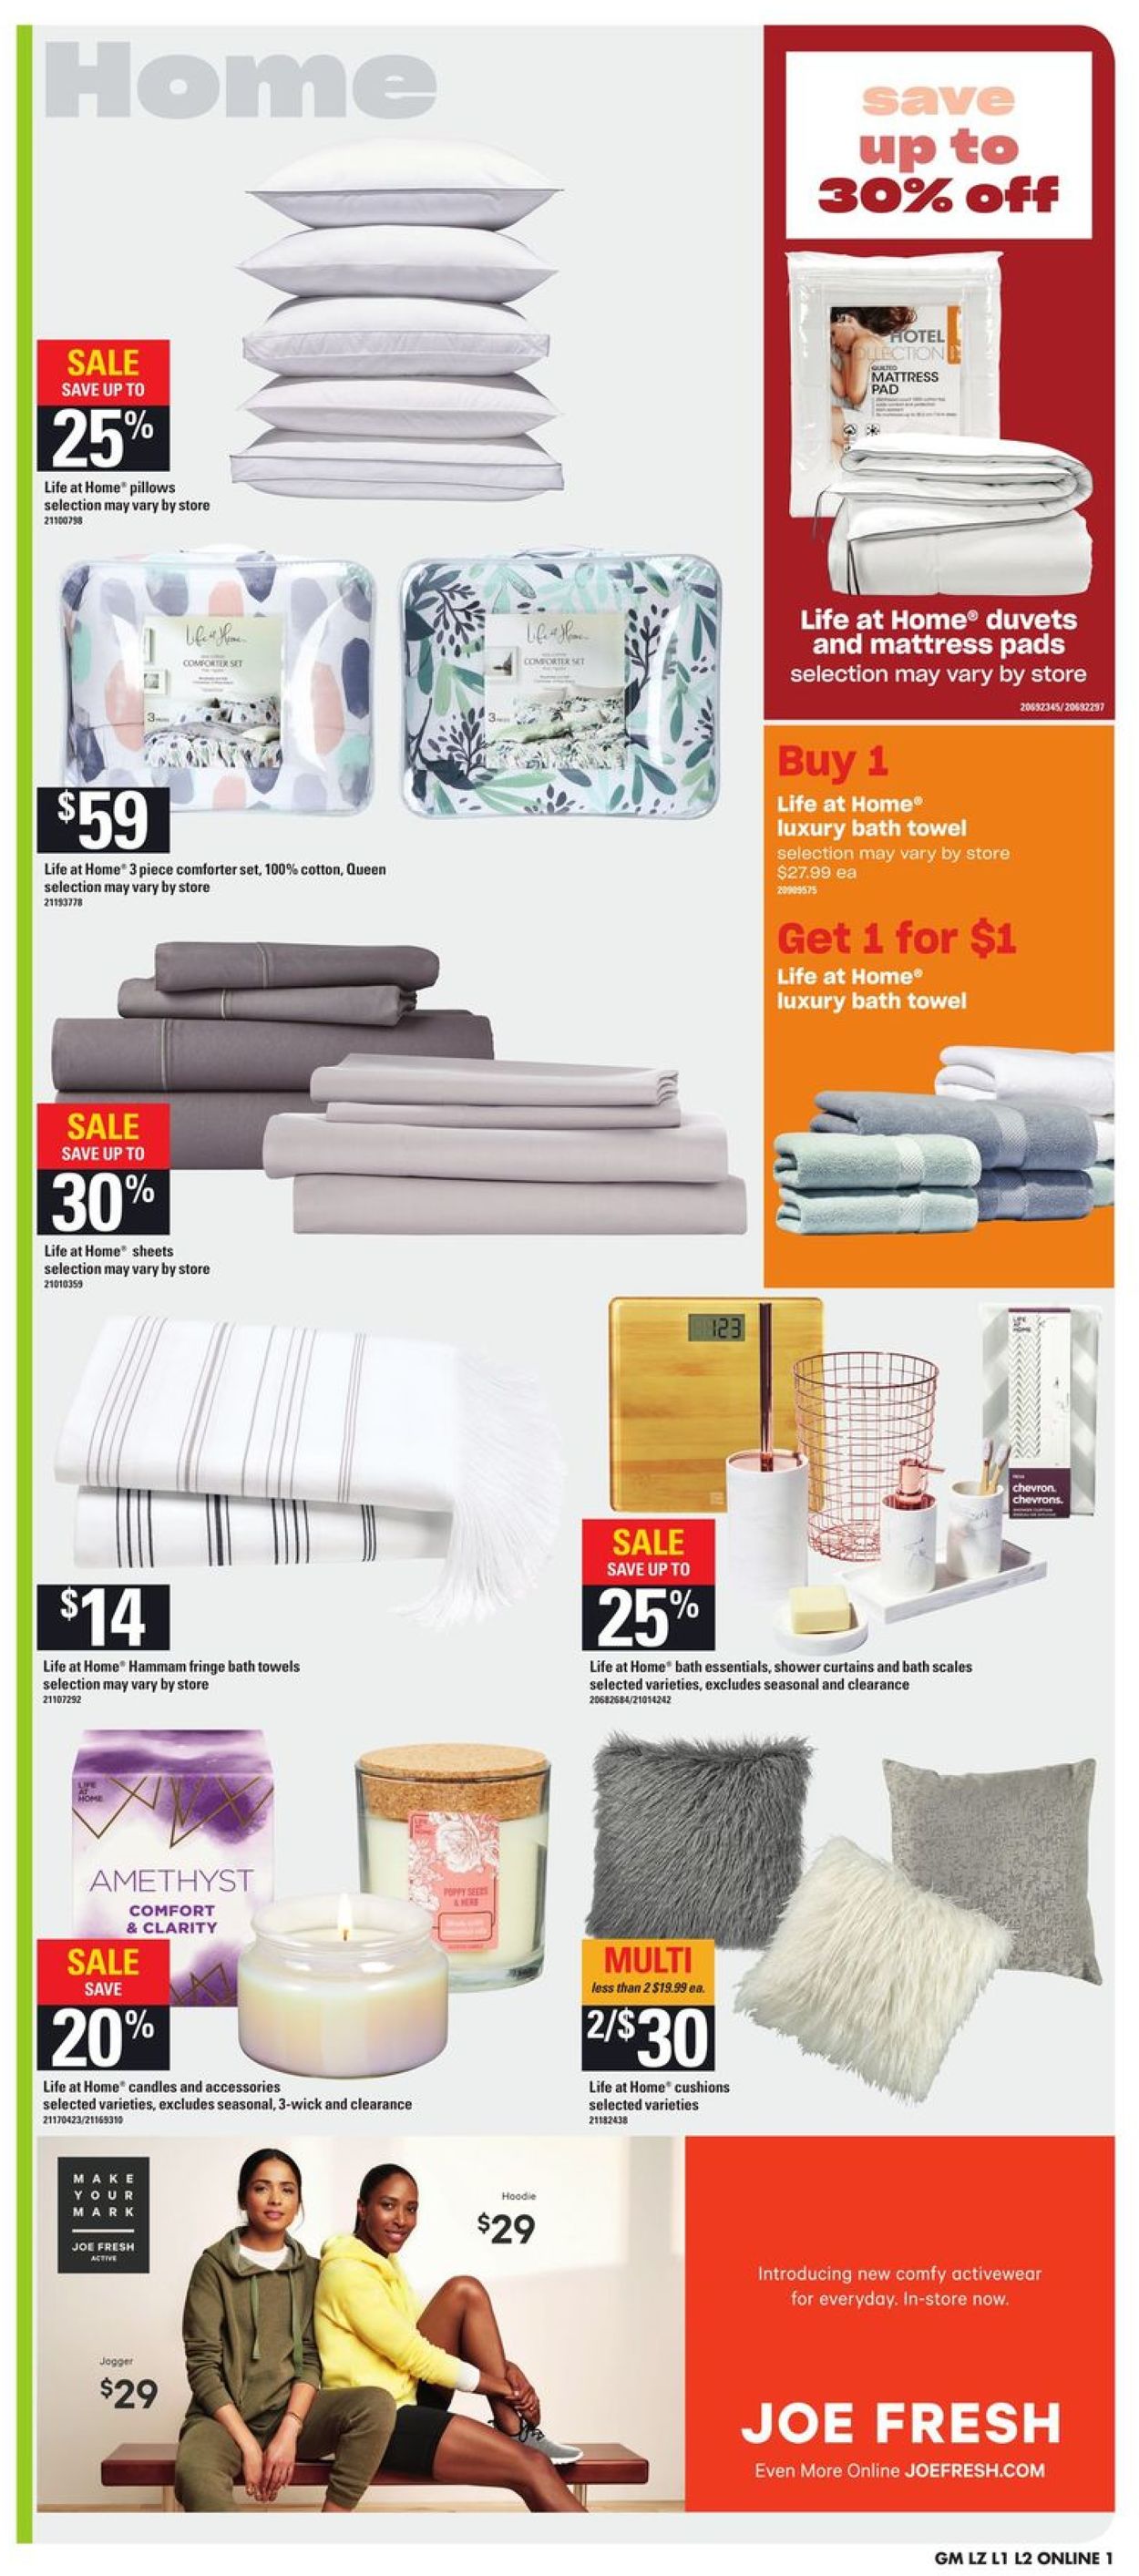 Loblaws Flyer from 01/16/2020